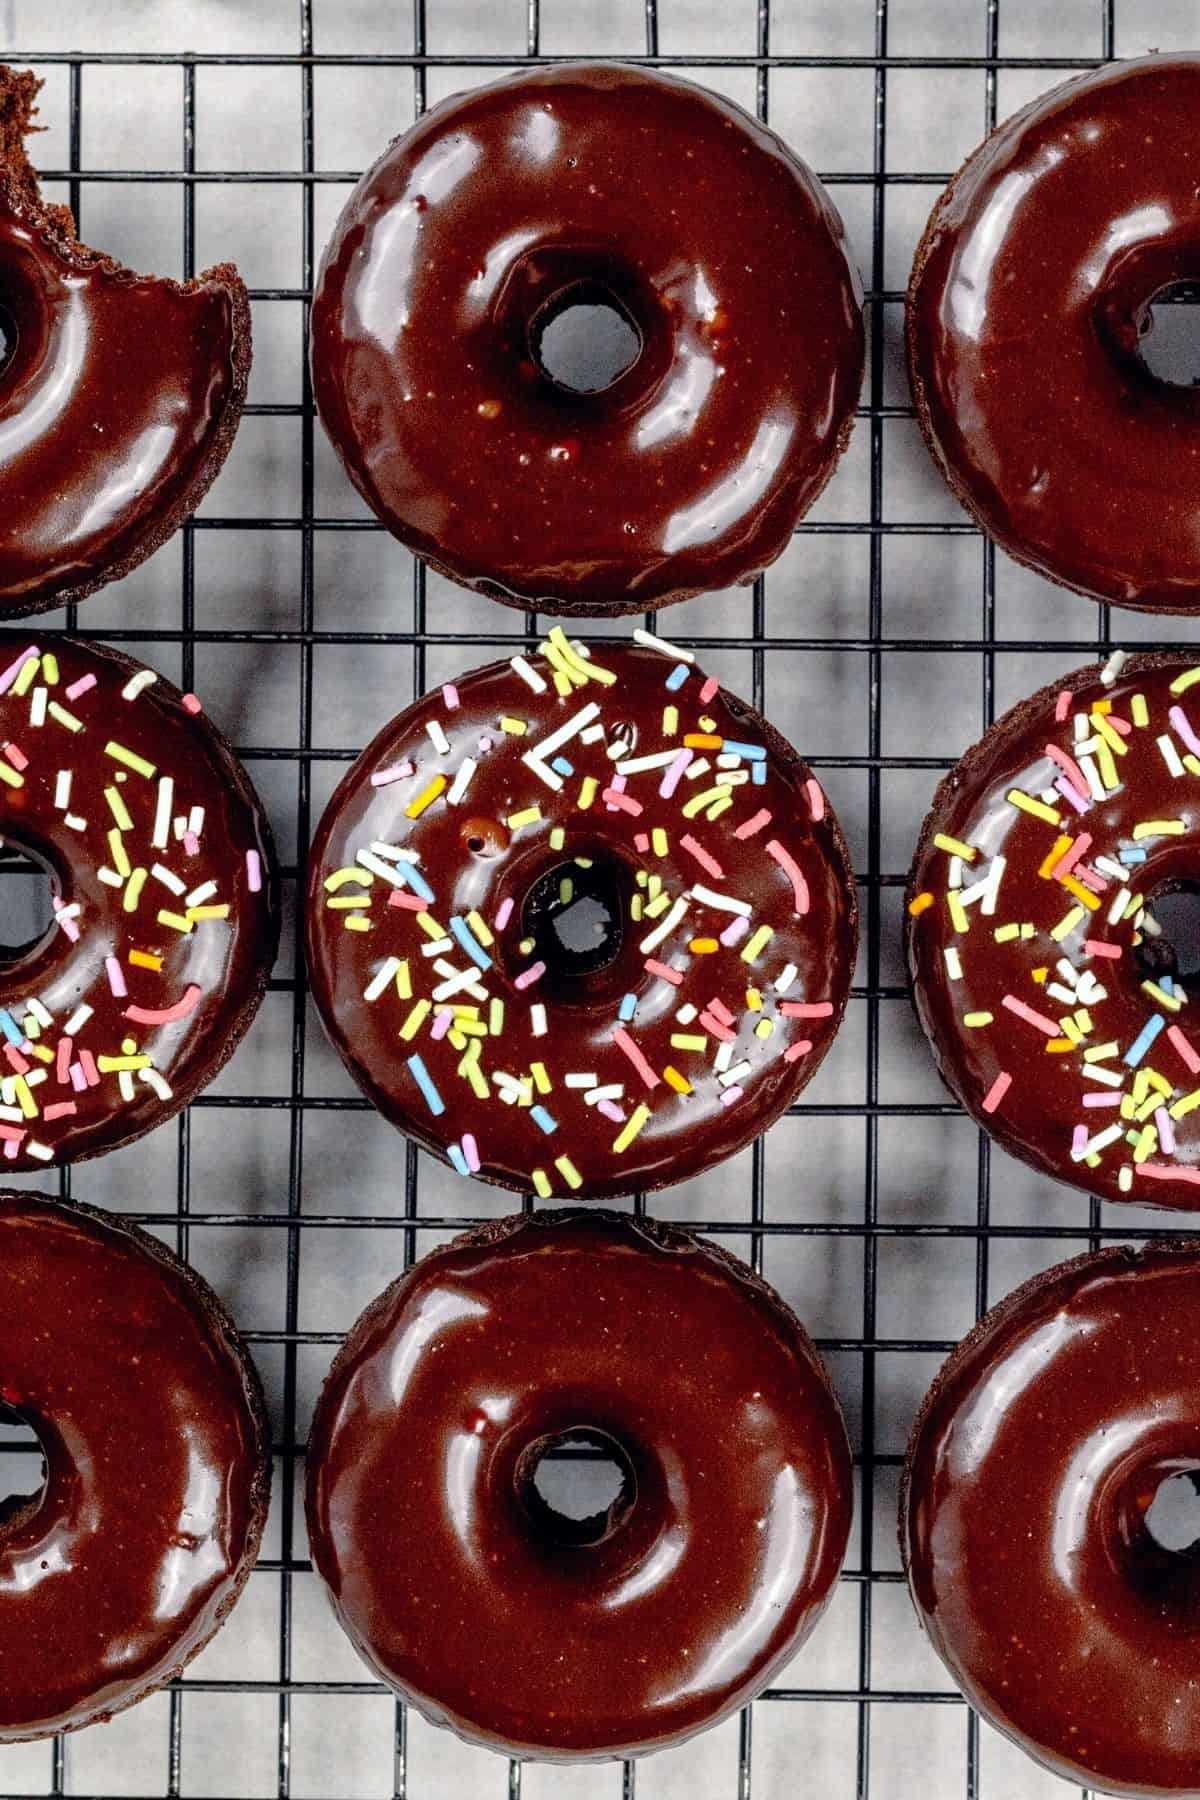 Close up of 9 frosted chocolate donuts on a wire cooling rack. 3 of the donuts have multicolored sprinkles. The top left donut has a bite taken out of it.